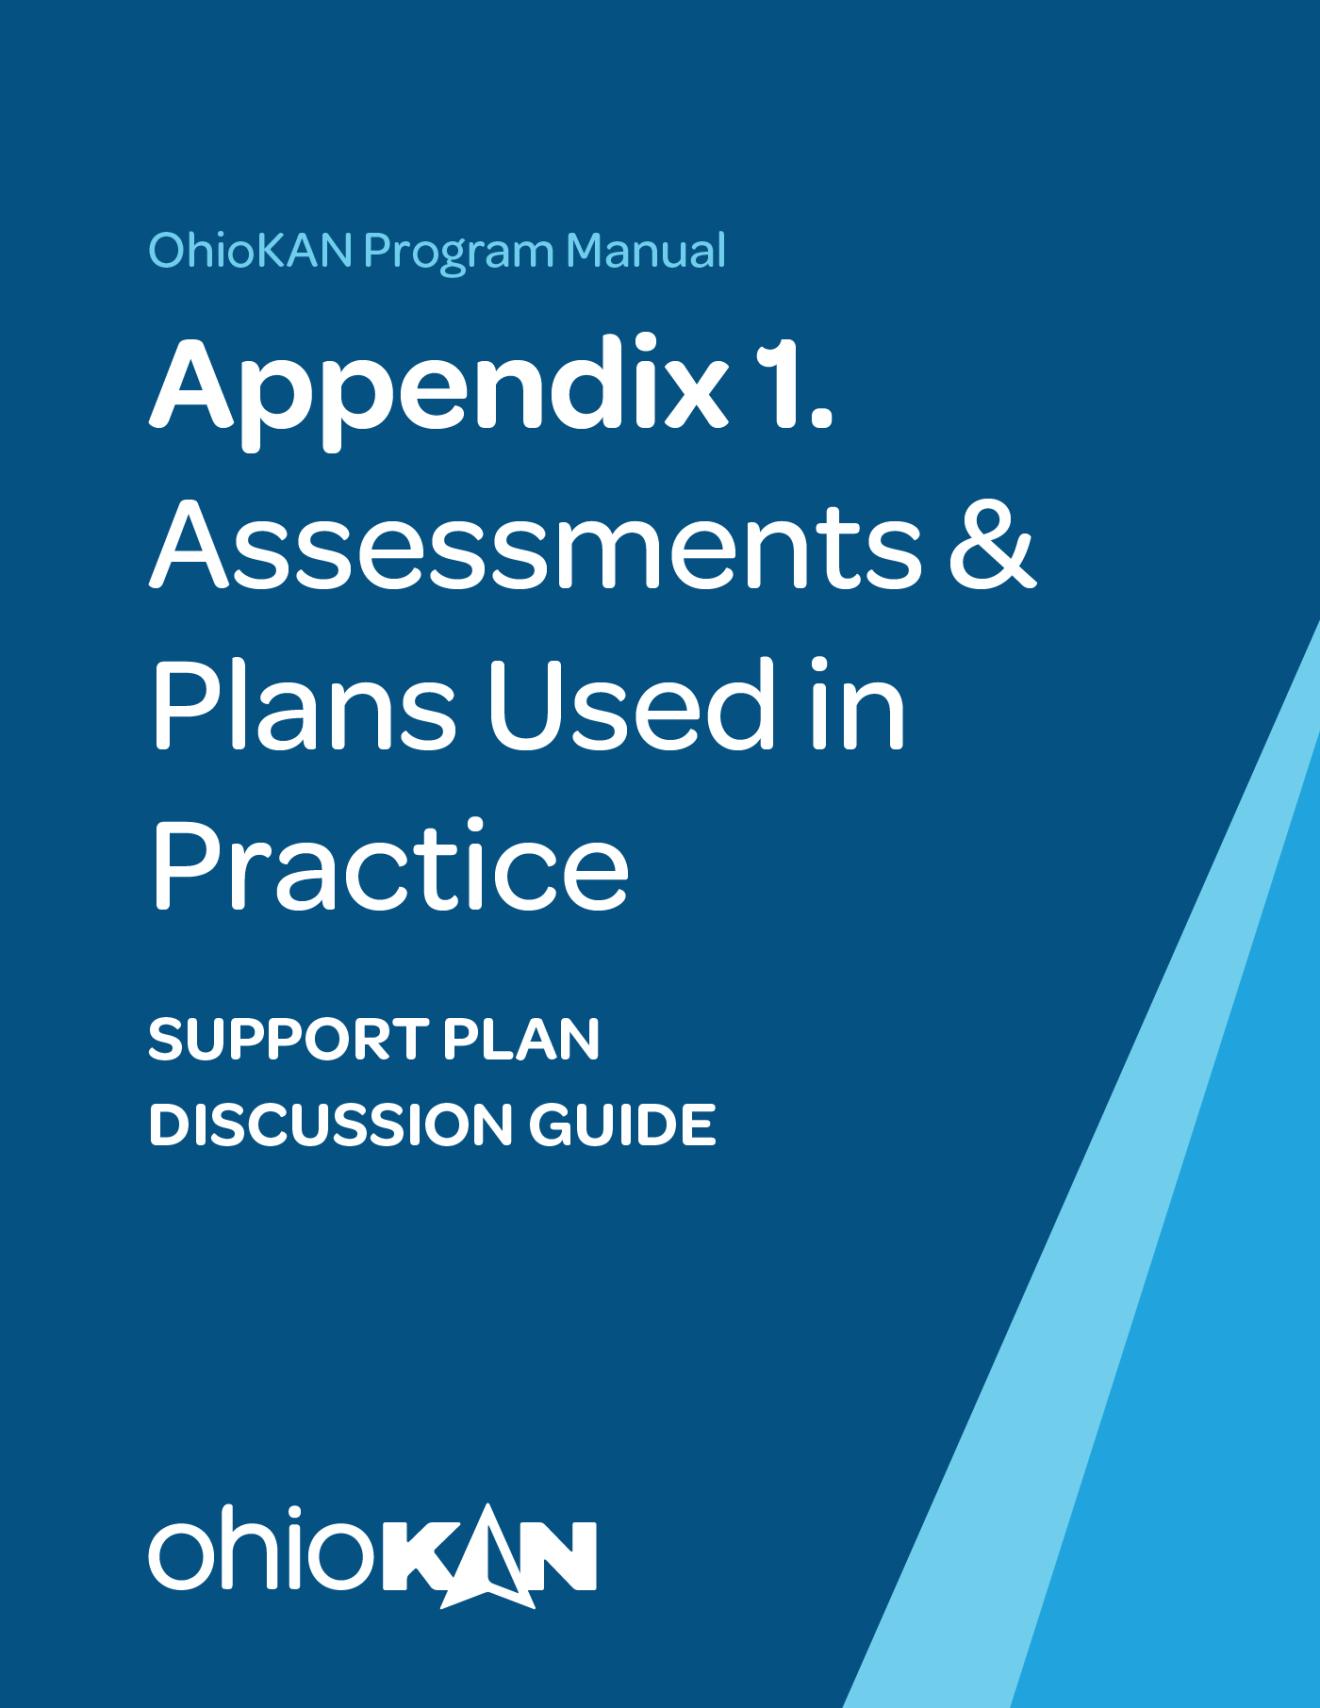 Appendix 1 Support Plan Discussion Guide